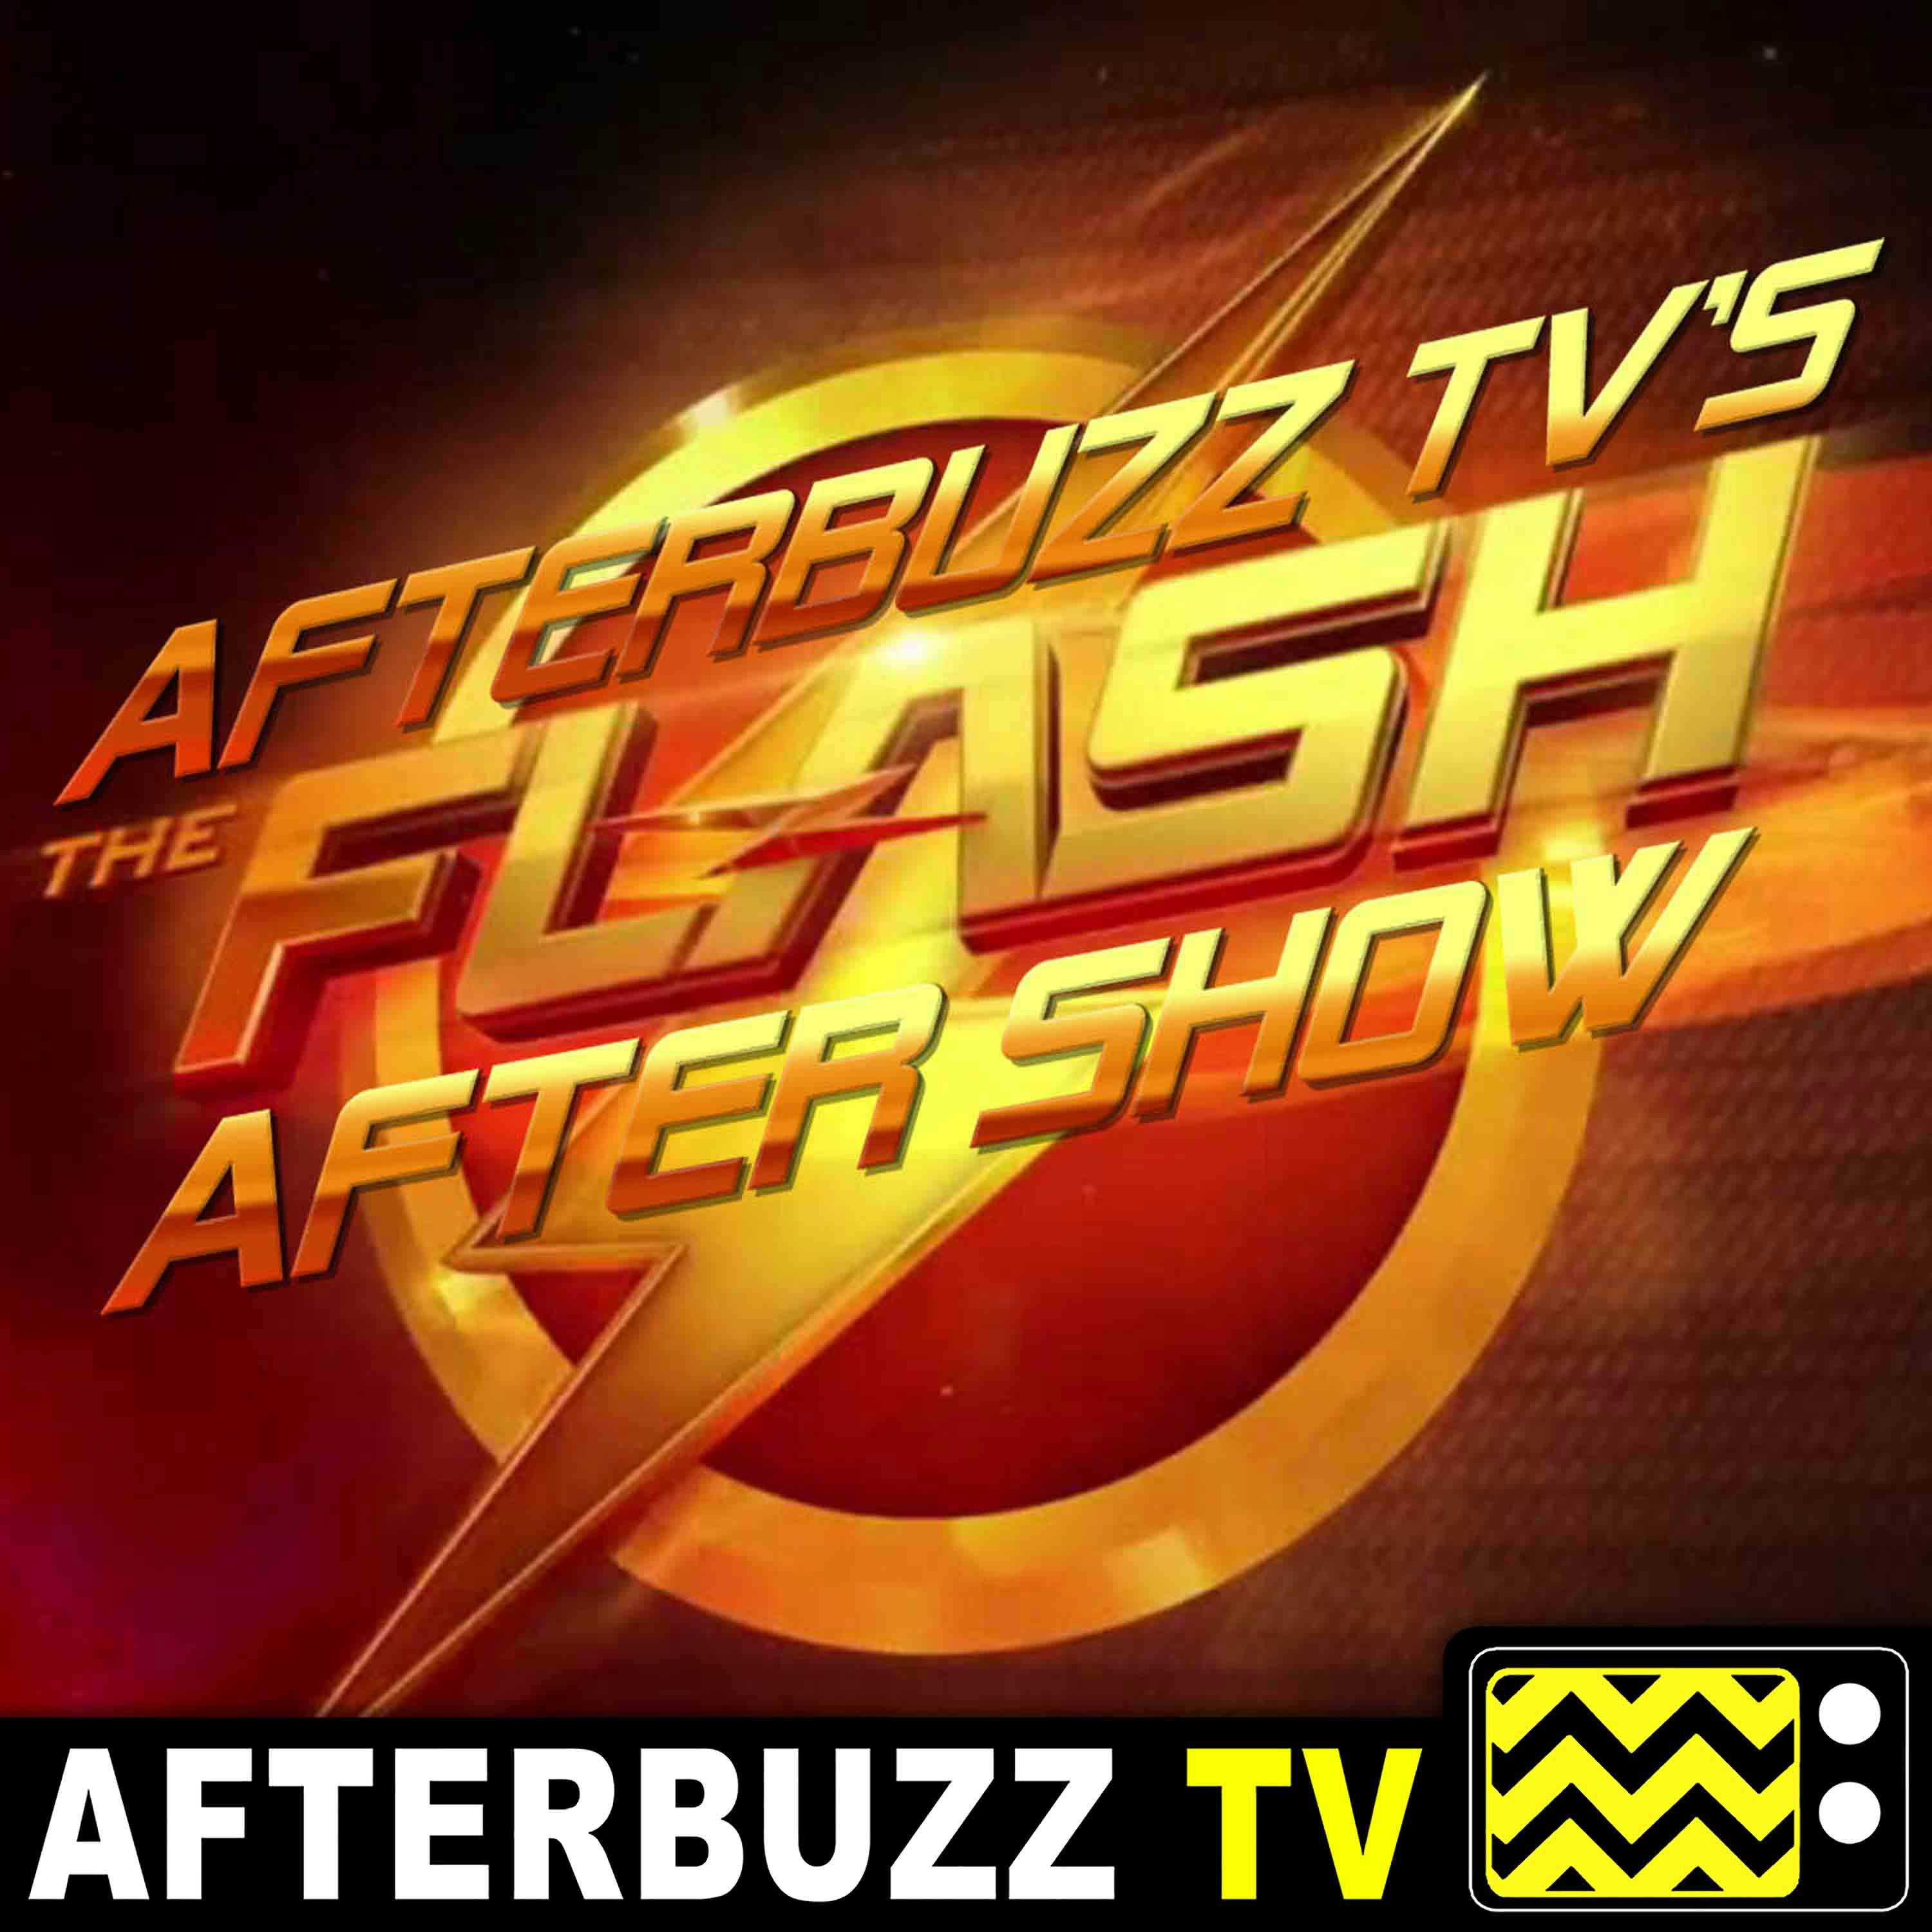 The Flash S6 E17 Recap & After Show: Wedding Bells are Ringing!